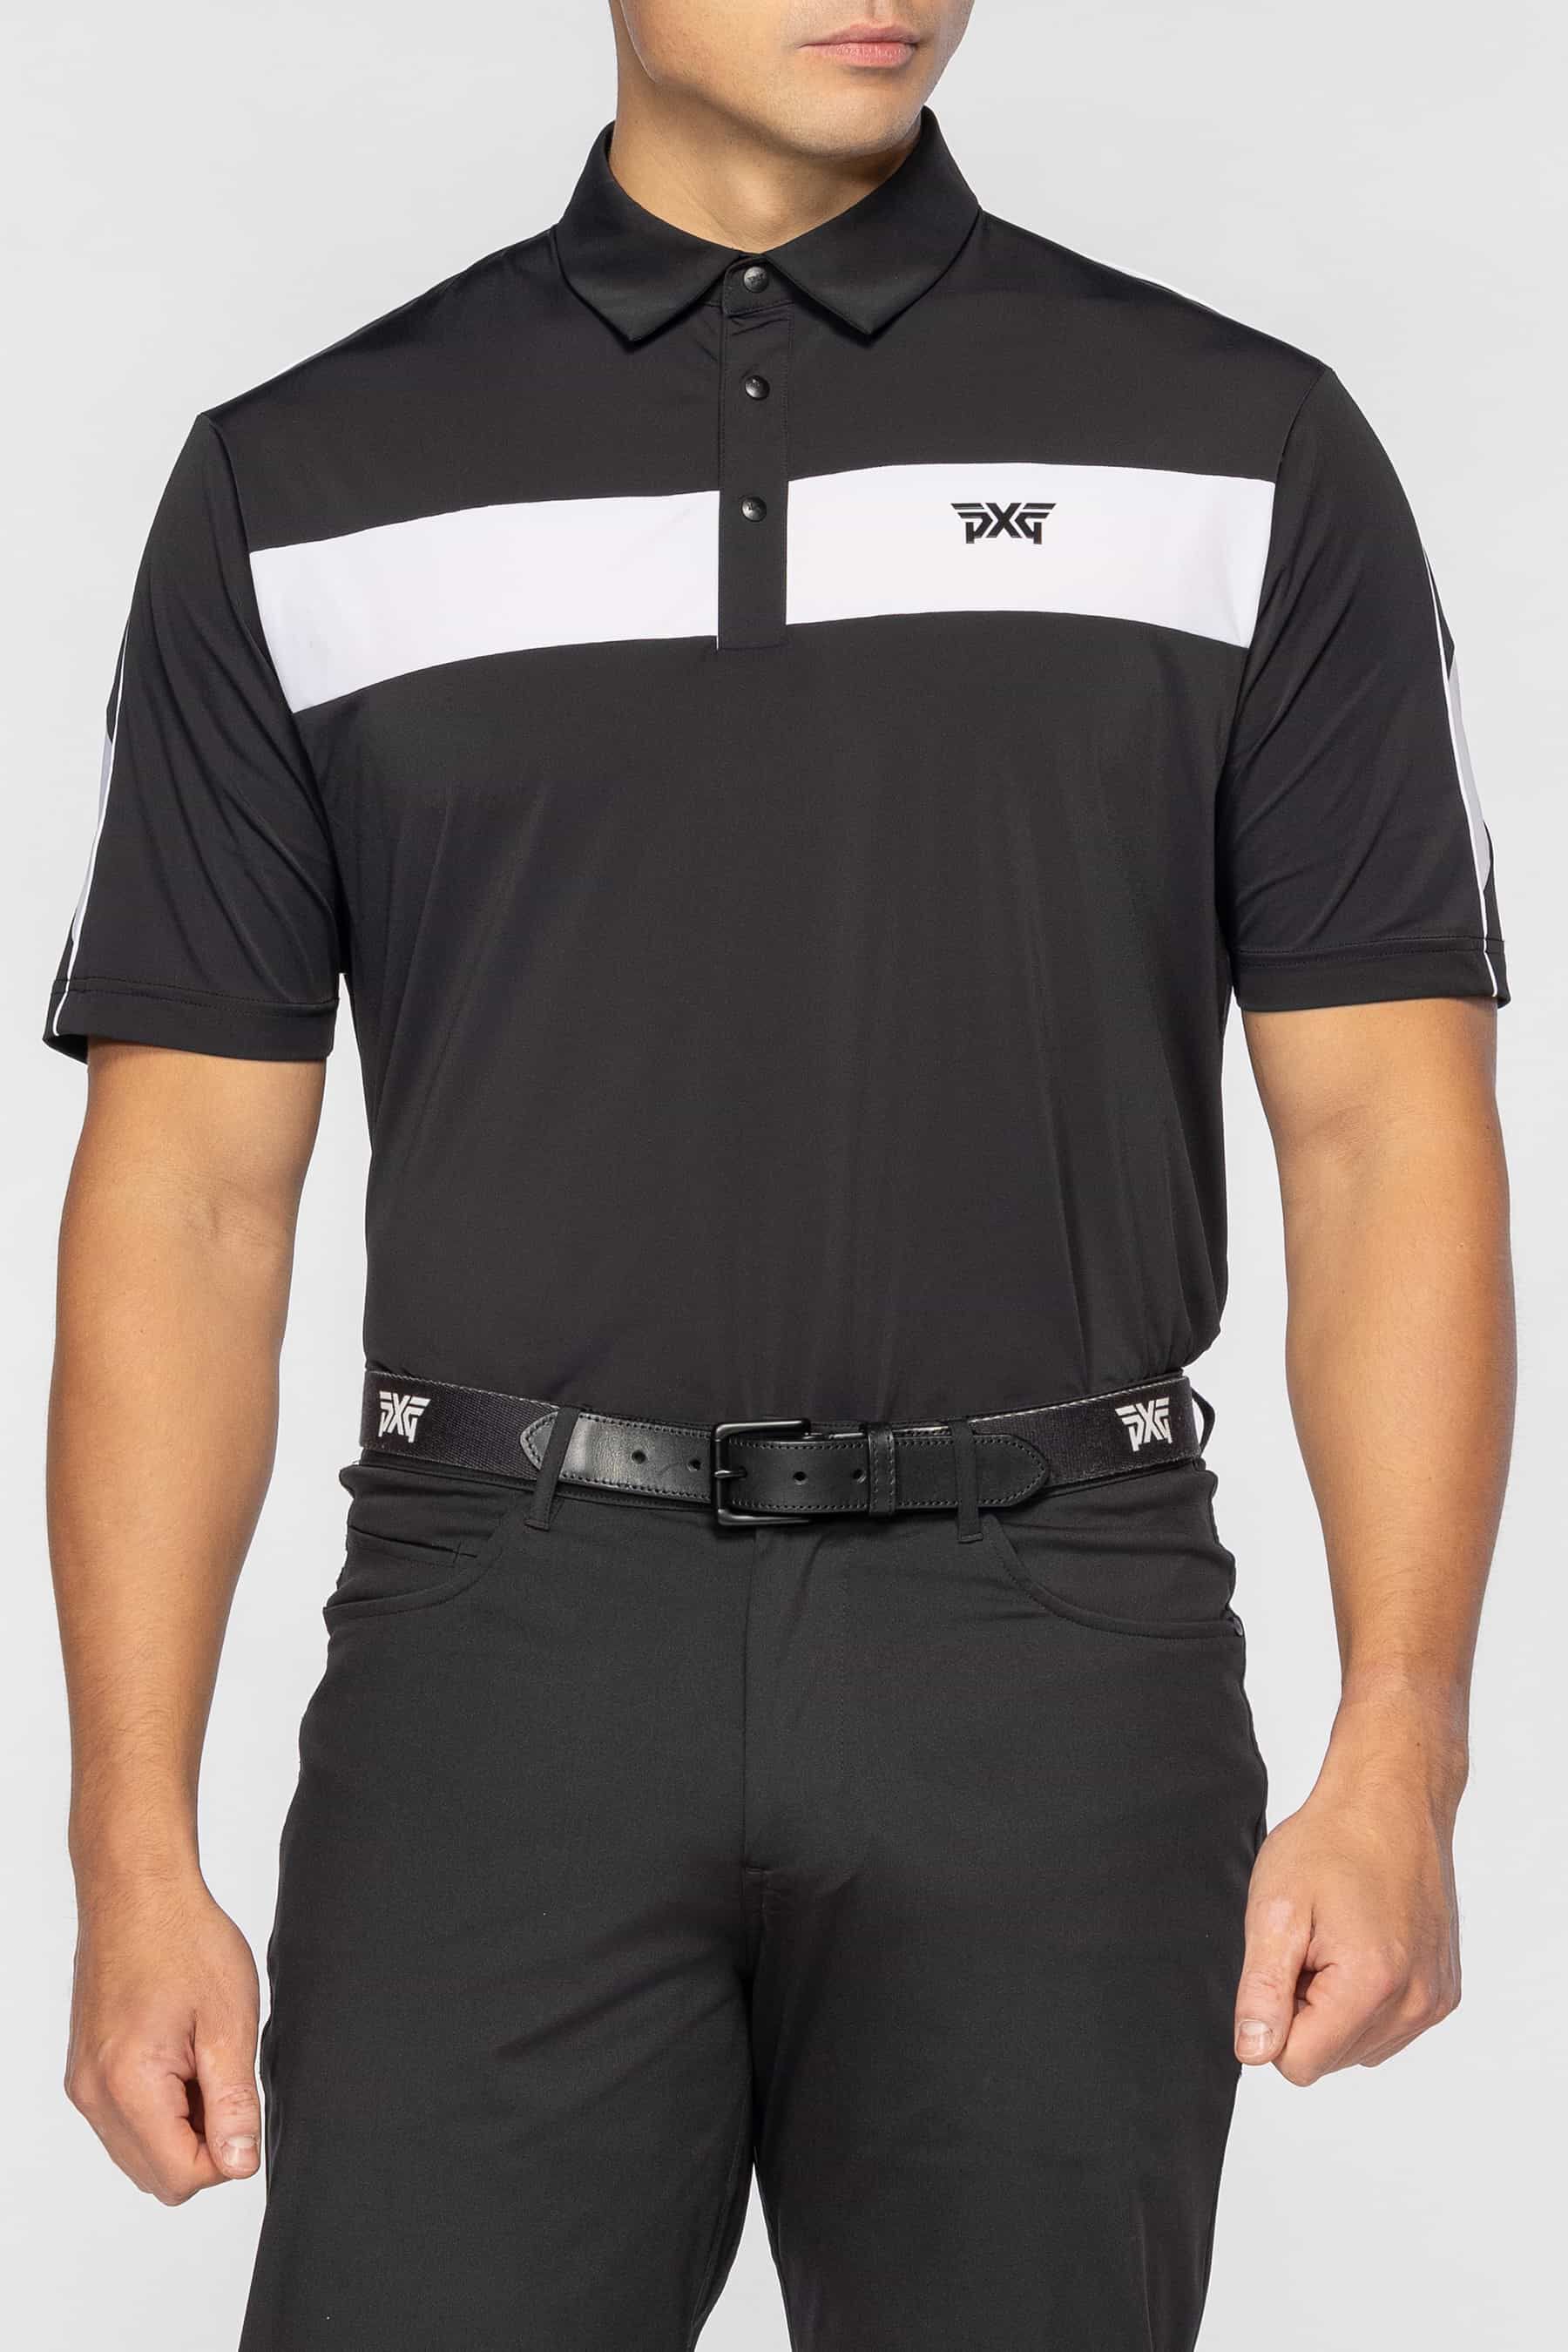 Shop Men's Golf Clothes and Apparel - Online or In-Store | PXG